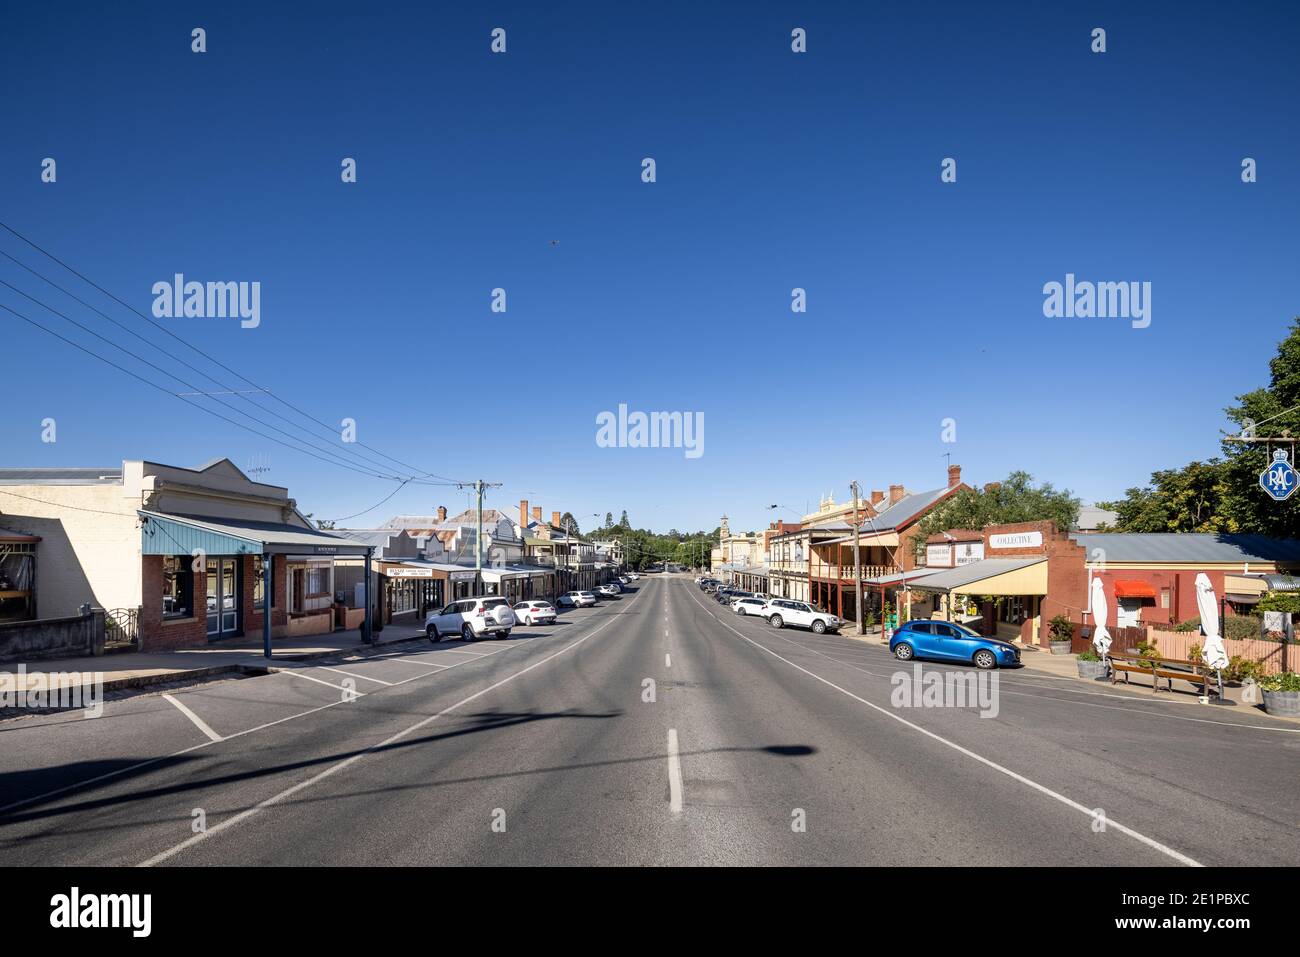 Looking straight down the main street in Beechworth, Victoria, Australia; the historic post office building can be seen in the background. Stock Photo